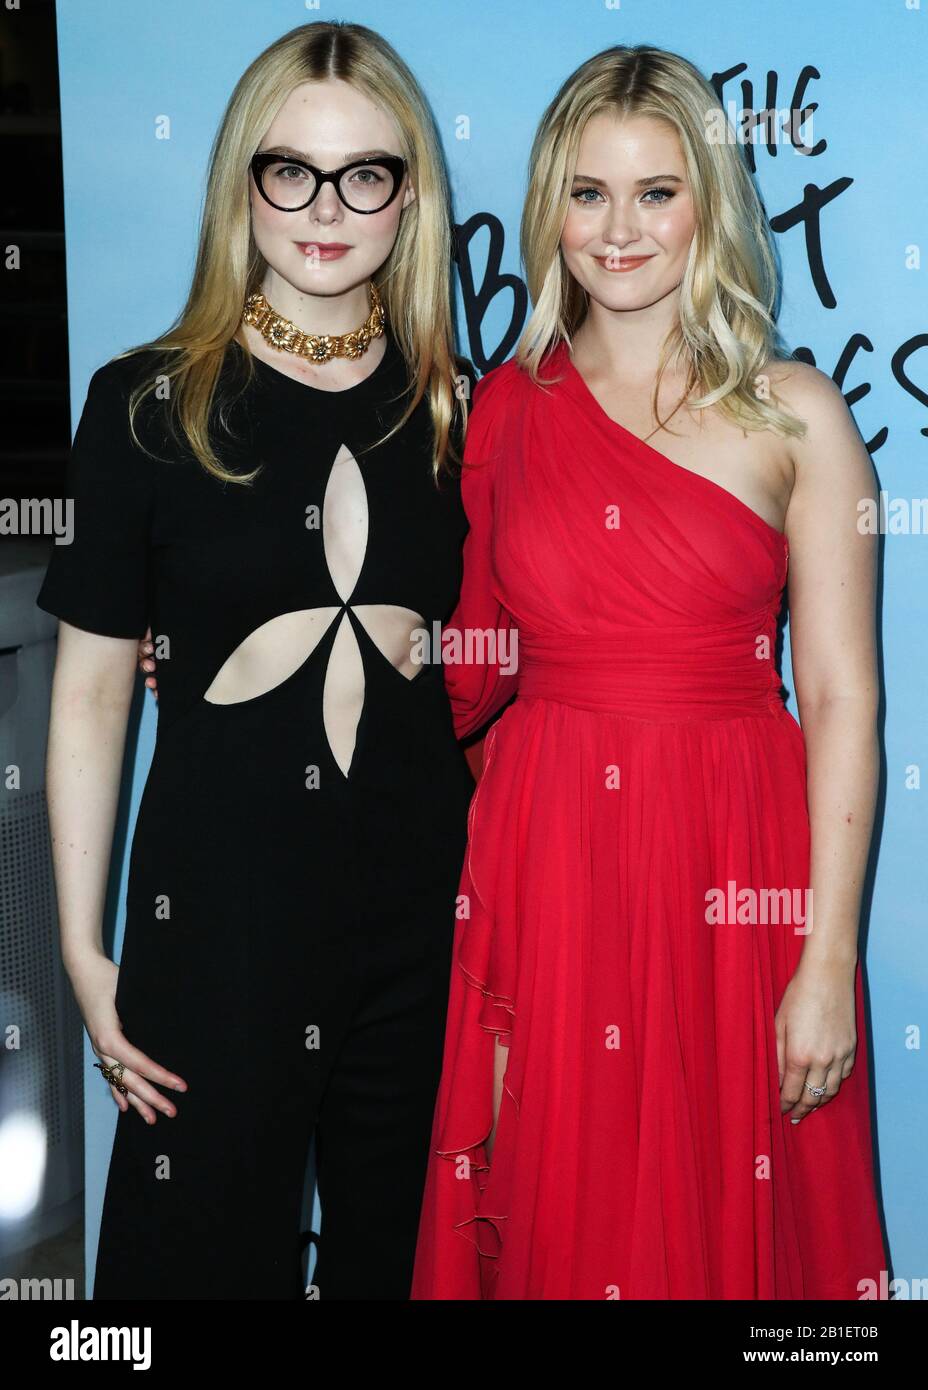 HOLLYWOOD, LOS ANGELES, CALIFORNIA, USA - FEBRUARY 24: Actresses Elle Fanning and Virginia Gardner arrive at the Los Angeles Special Screening Of Netflix's 'All The Bright Places' held at ArcLight Hollywood on February 24, 2020 in Hollywood, Los Angeles, California, United States. (Photo by Xavier Collin/Image Press Agency) Stock Photo